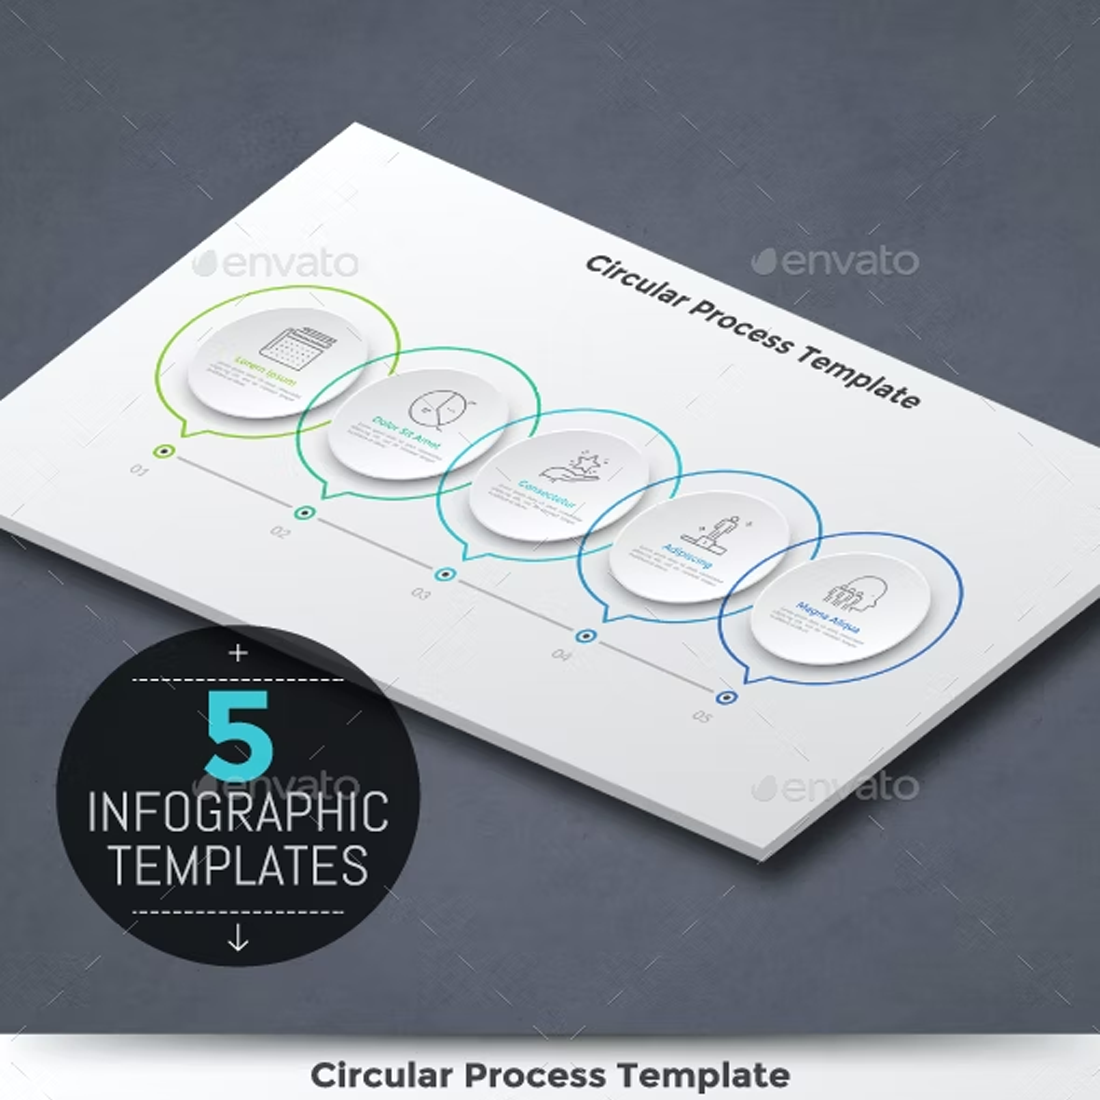 Images preview 5 process infographic templates.